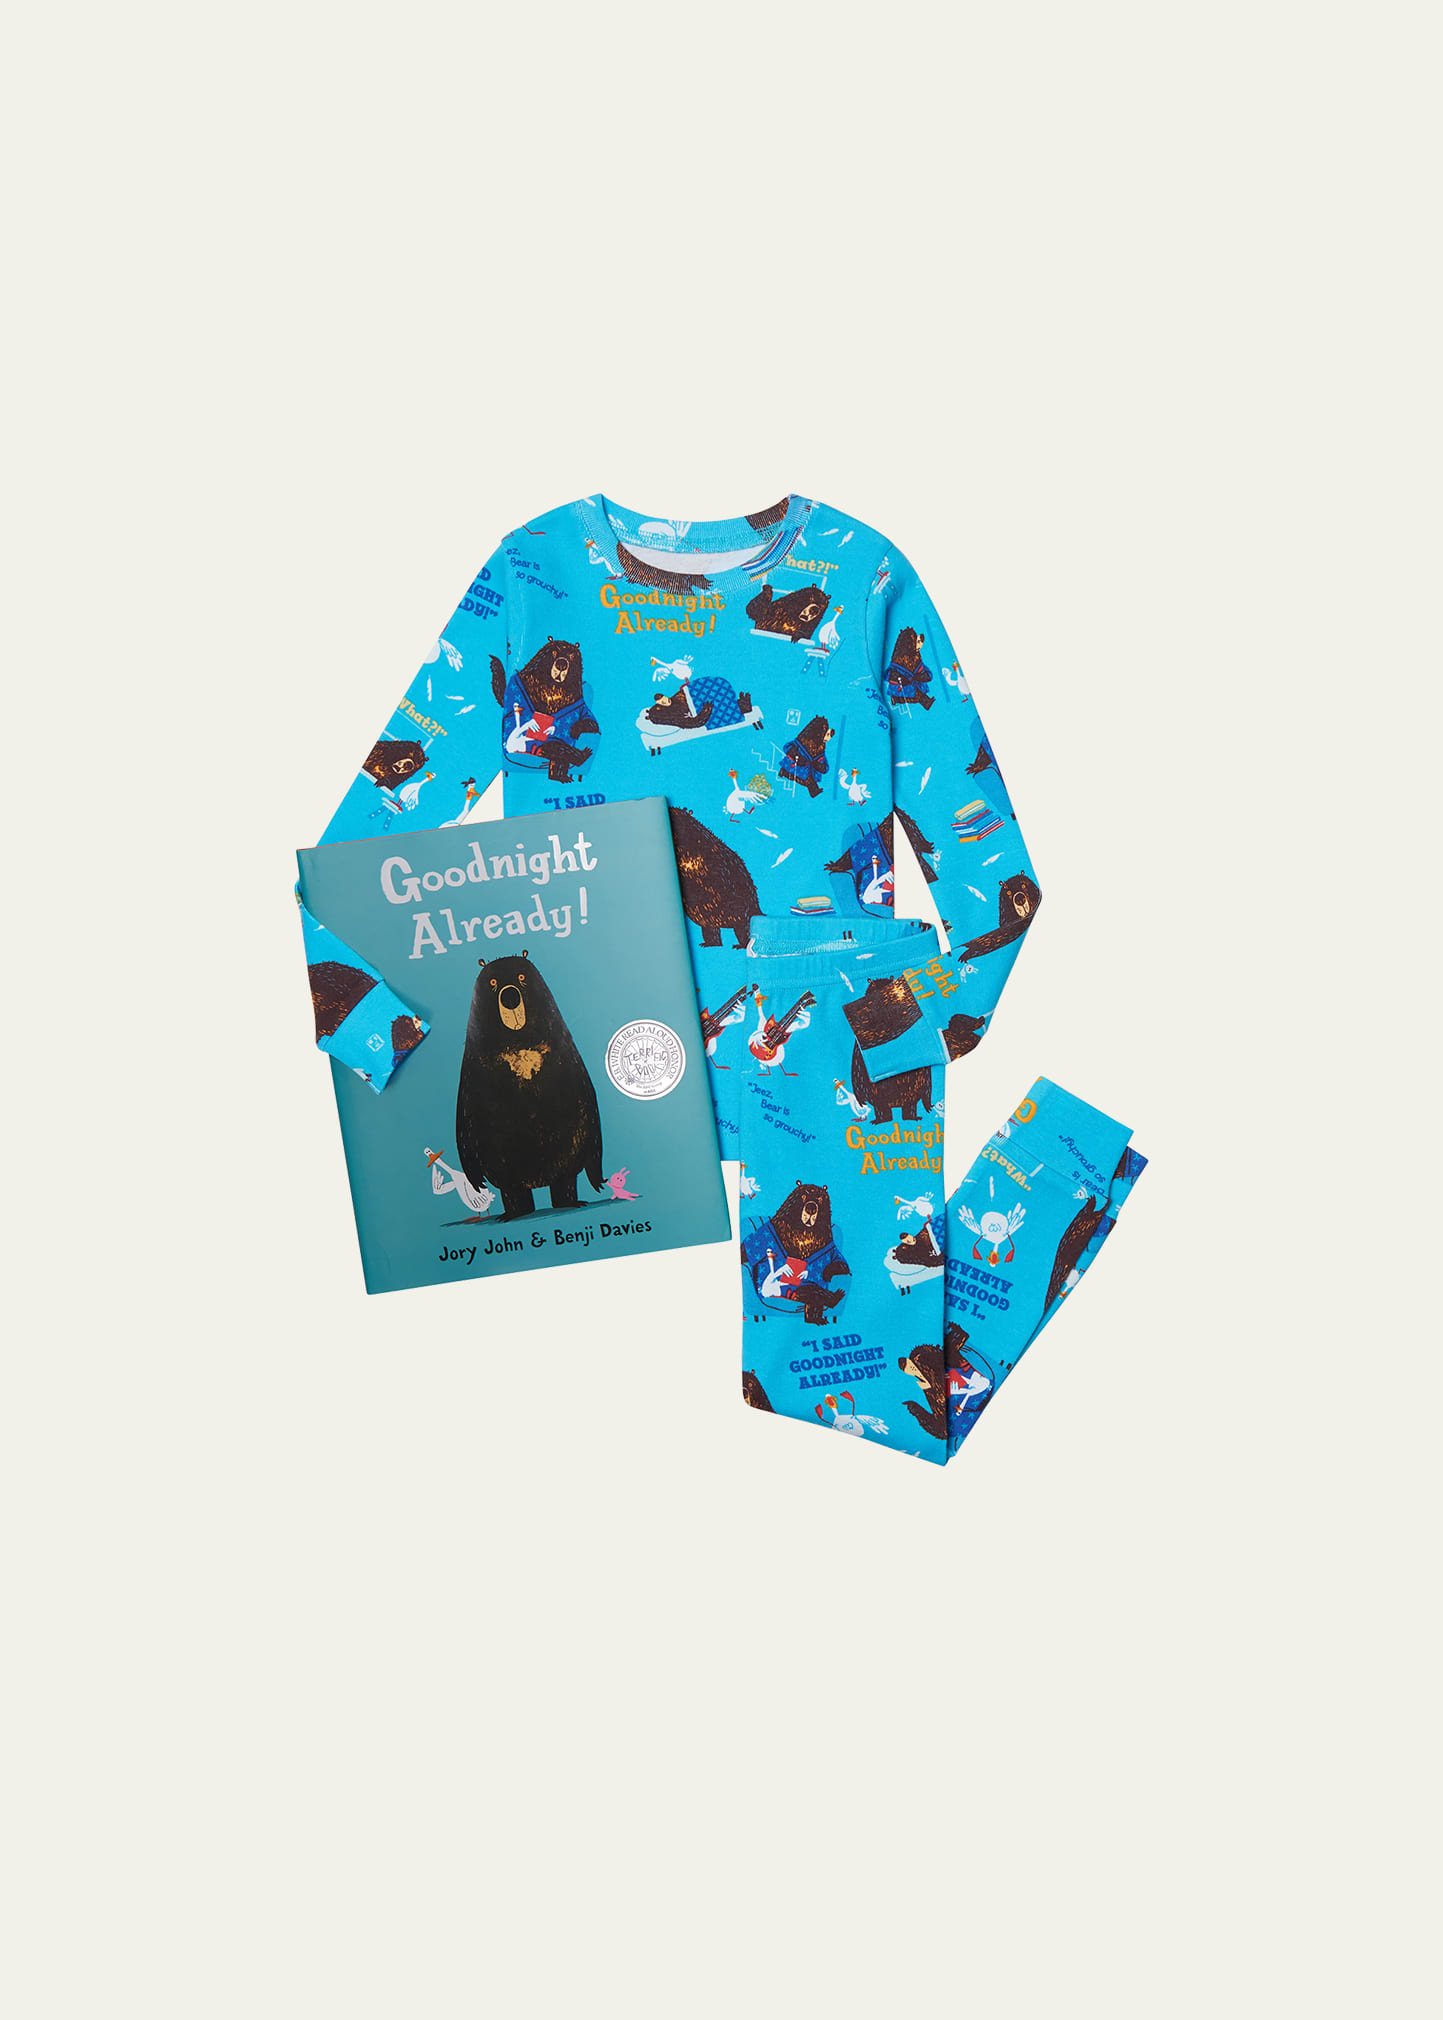 Books To Bed Kid's Goodnight Already Printed Pajama Gift Set, Size 2-6